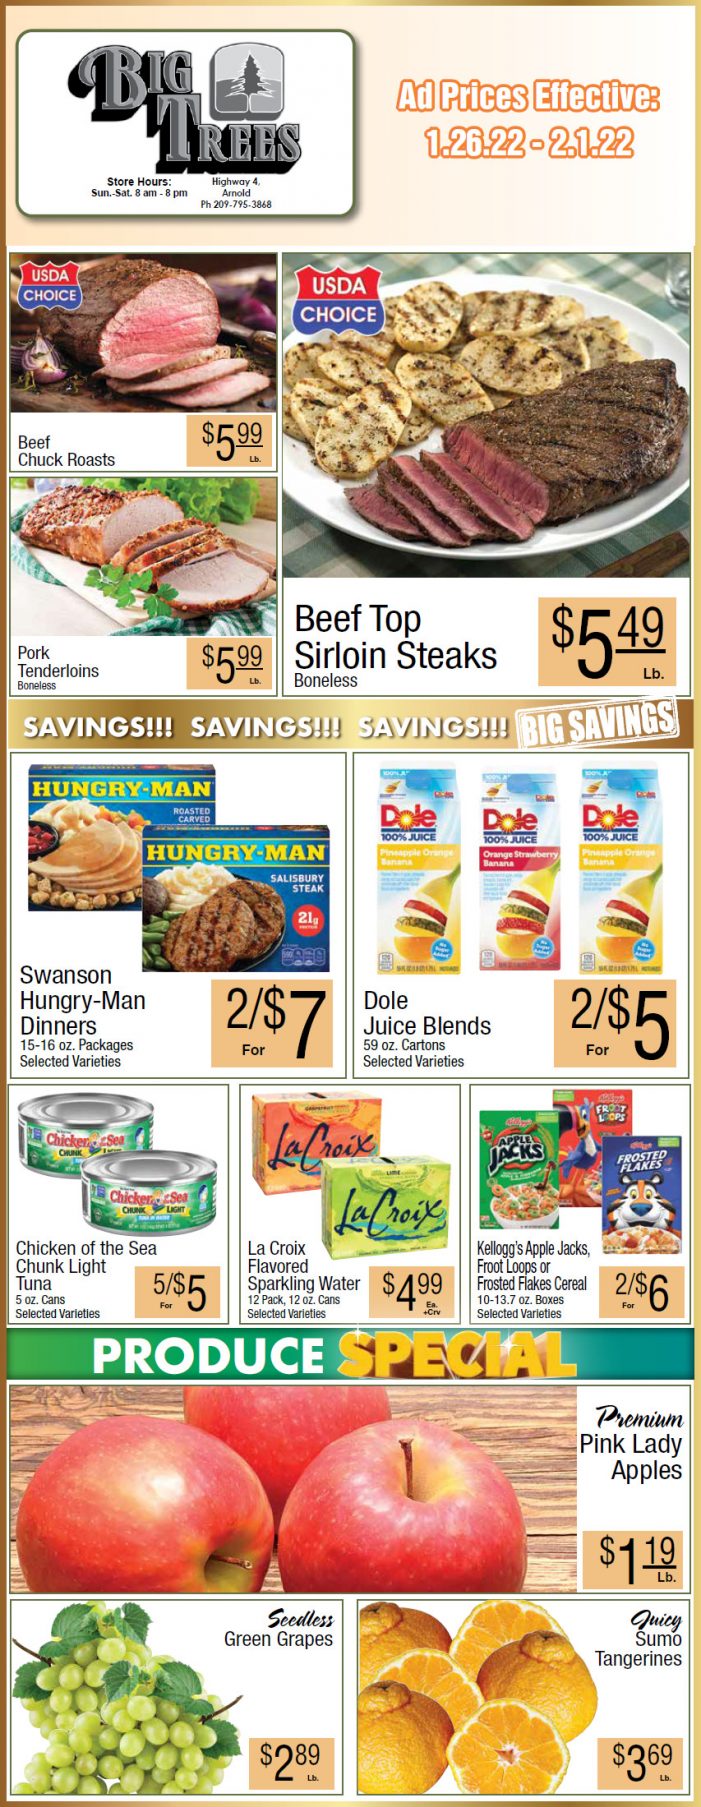 Big Trees Market Weekly Ad & Grocery Specials January 26th Through February 1st! Shop Local & Save!